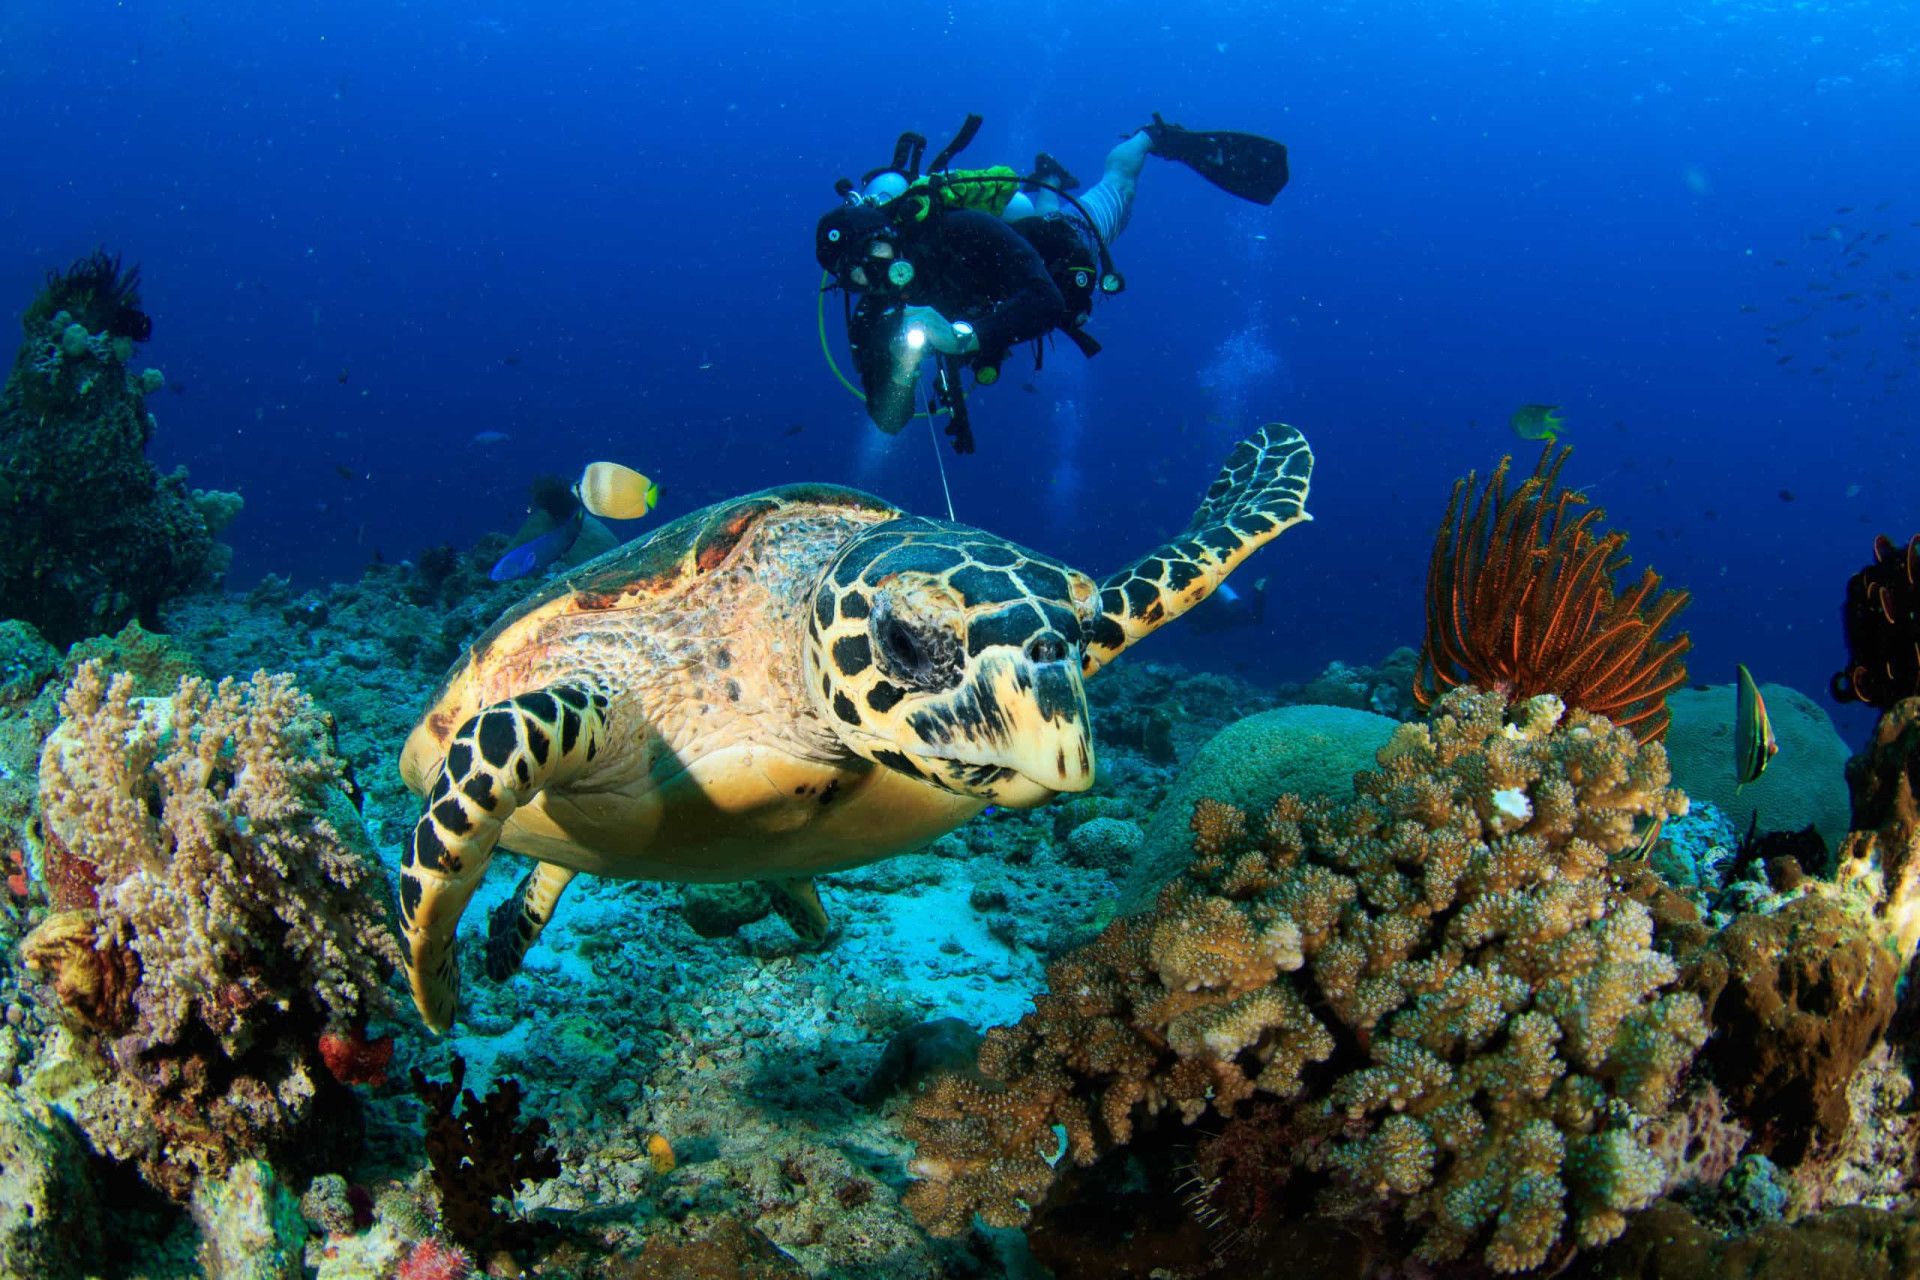 <p>Scuba diving or snorkeling can be an ethical way to experience underwater wildlife as long as you take proper measures like not touching the reef, removing any waste you see, using reef-safe sunscreen, and choosing destinations and guides that maintain ethical and environmentally-friendly practices.</p><p>You may also like:<a href="https://www.starsinsider.com/n/502876?utm_source=msn.com&utm_medium=display&utm_campaign=referral_description&utm_content=603887en-ie"> The disturbing prophecies of English witch Mother Shipton</a></p>